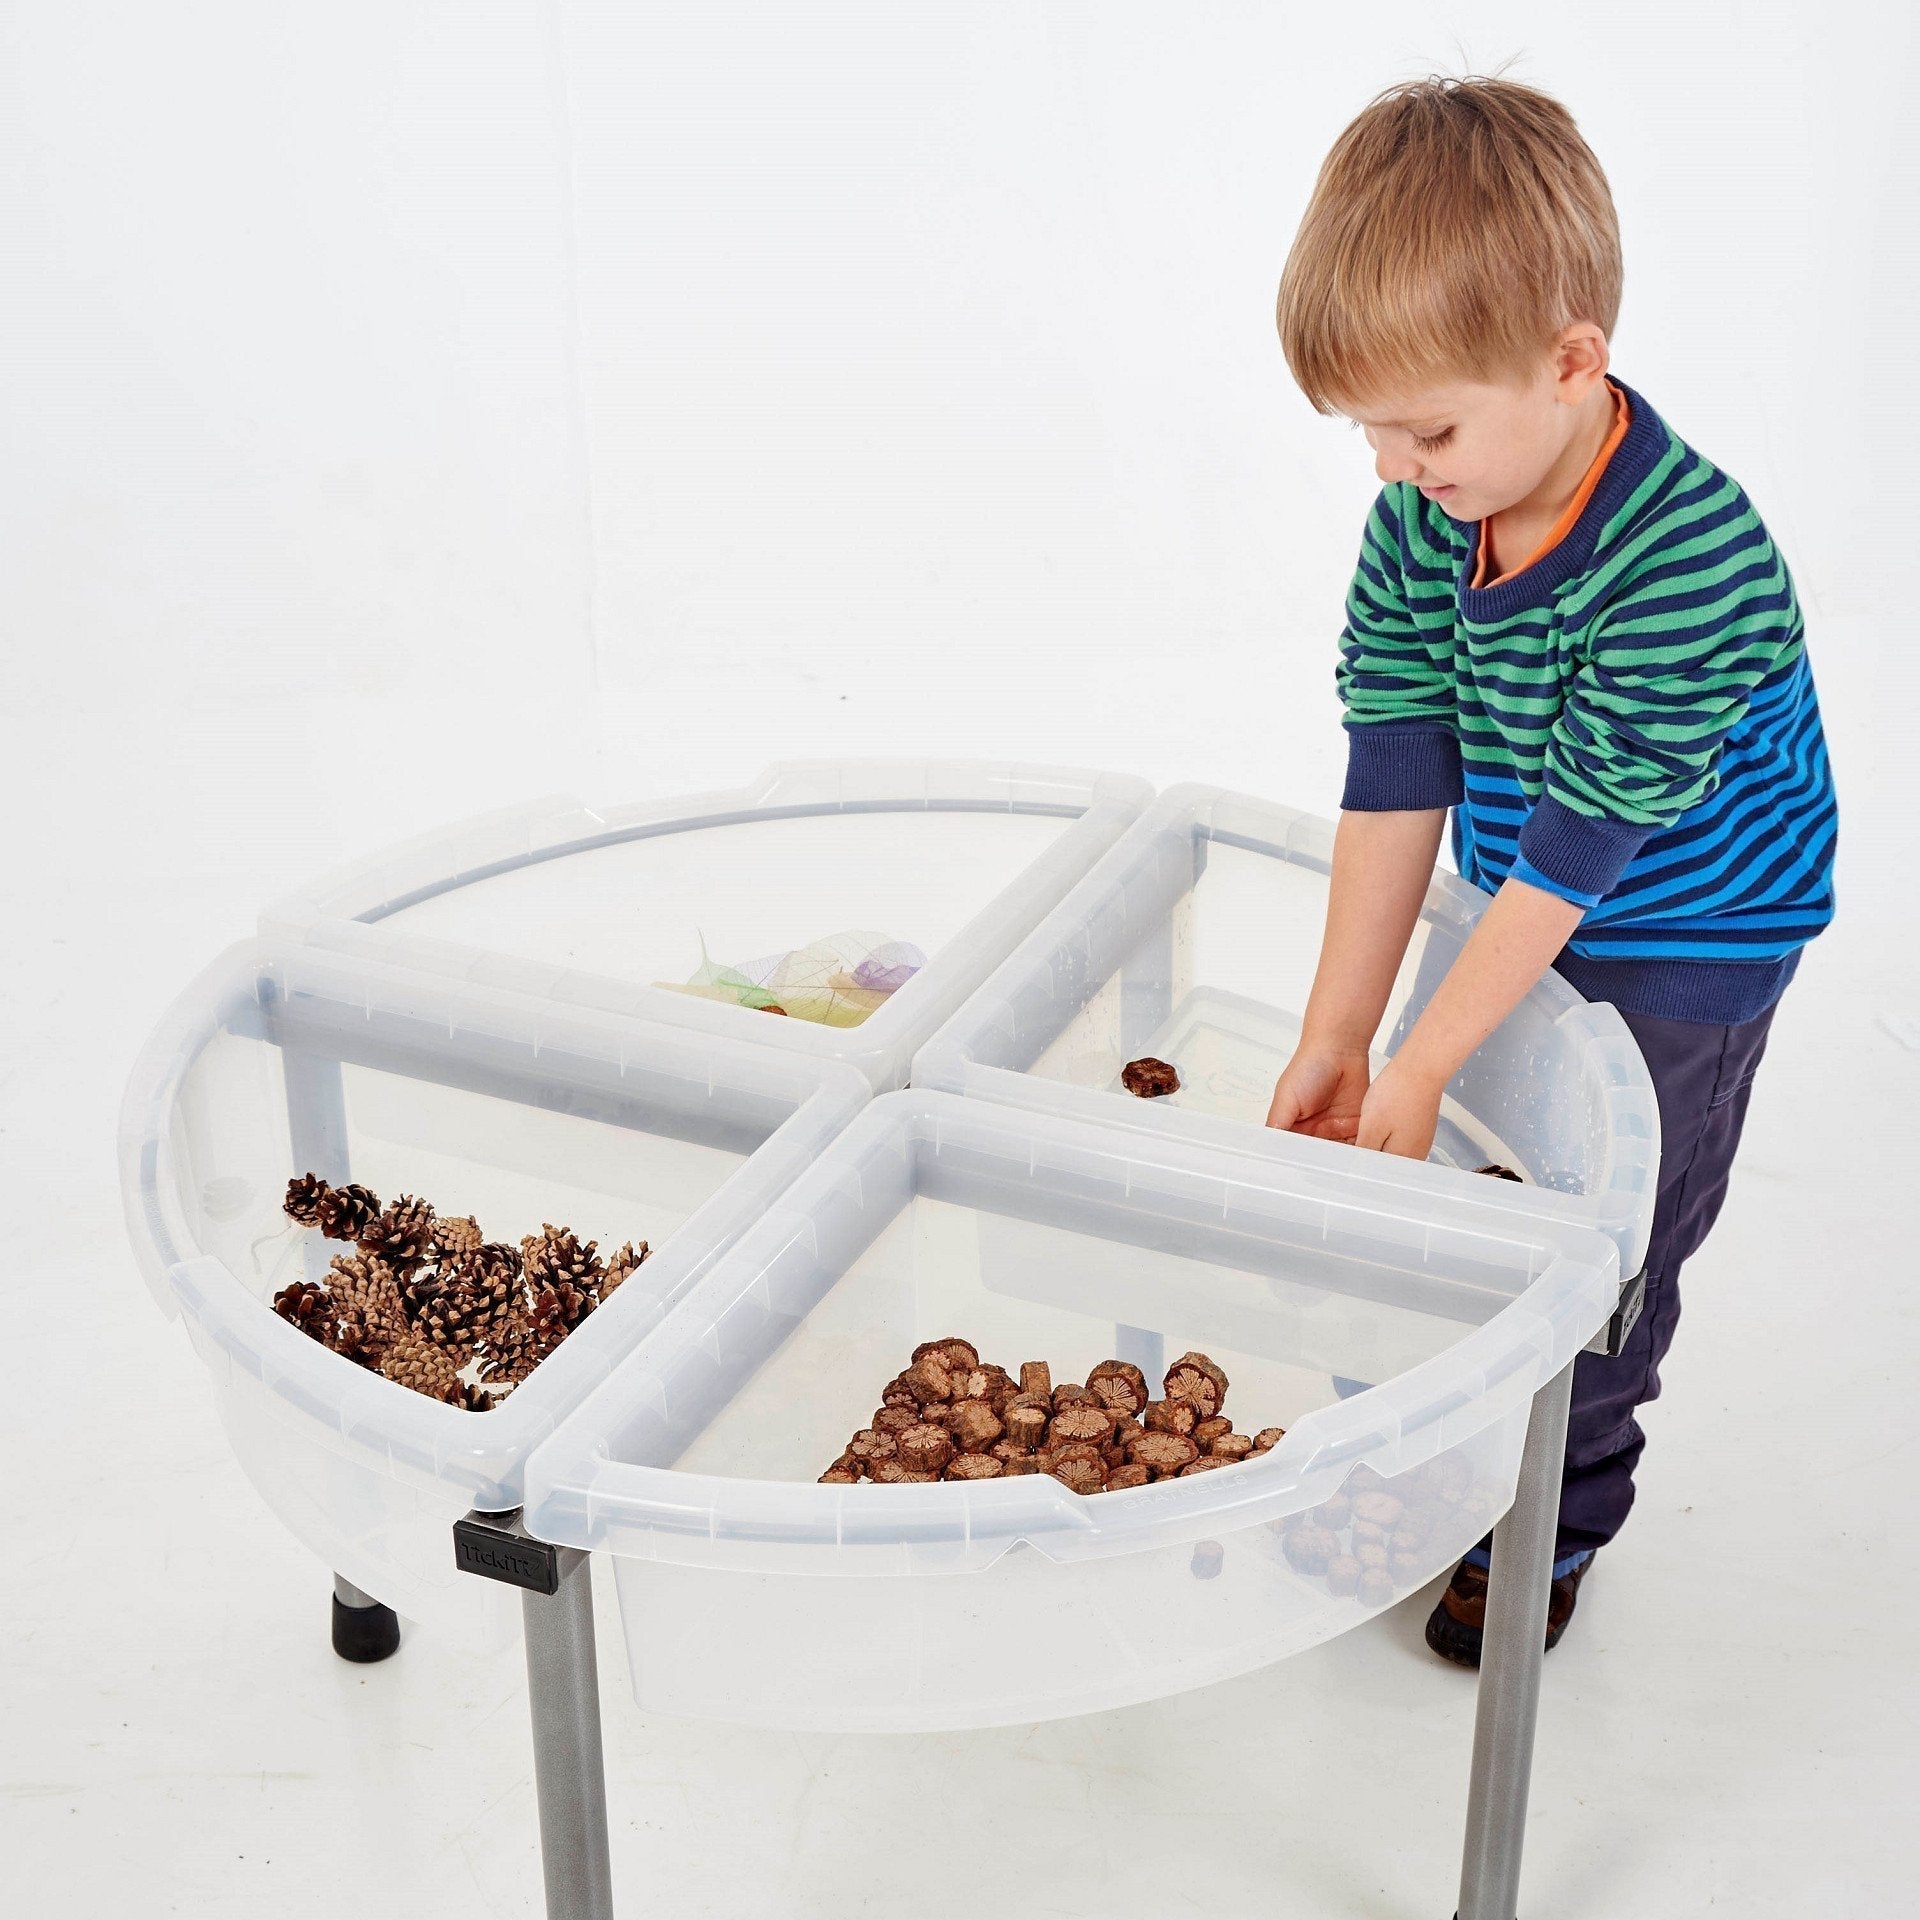 TickiT Exploration Circles Set Clear, Our TickiT Exploration Circles Set offer a great way for your child to play, examine and explore a range of different tactile materials, objects and natural treasures. The 4 quadrant trays come in a clear design.The TickiT Exploration Circles can be filled with a variety of enticing materials such as sand, water, confetti, wood chippings, pebbles, pine cones or even jelly, glitter and spaghetti! Whatever you choose to fill the containers with, the polypropylene trays ar